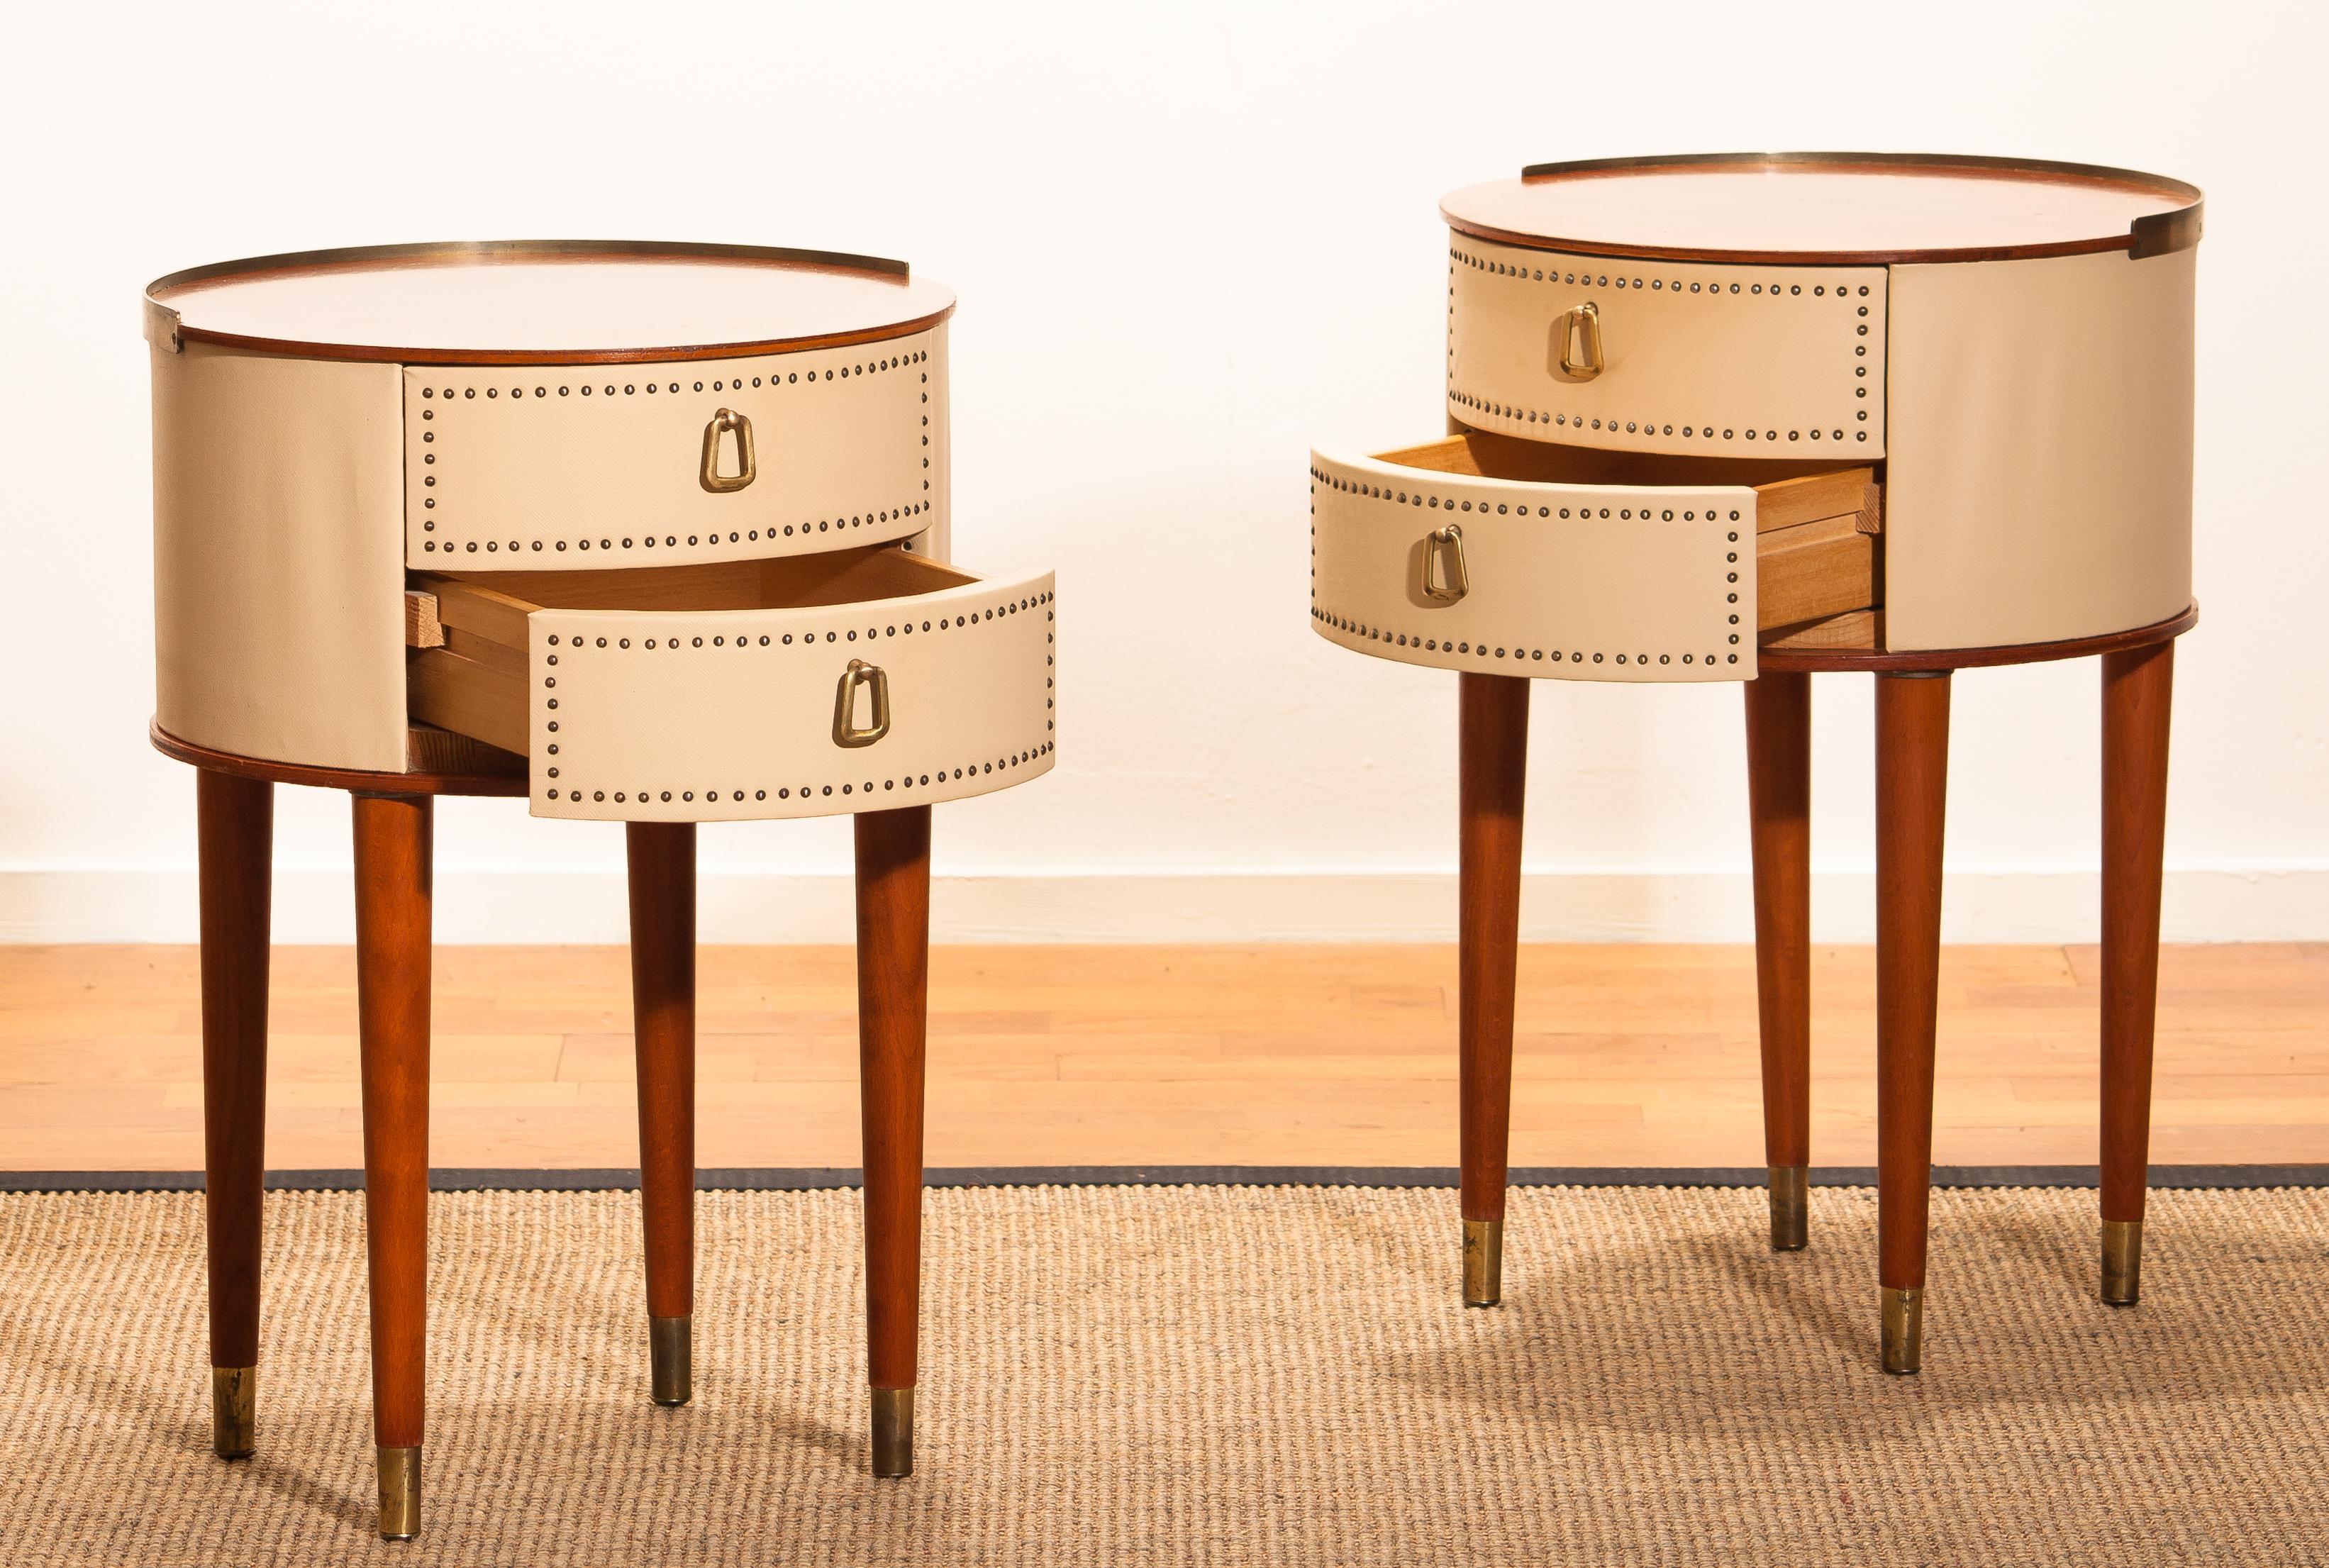 1950s. Mahogany / brass and vinyl, bedside tables or nightstands, on high legs designed by Halvdan Pettersson in the 1950s for Tibro Möbelfabrik Sweden. This set nightstands is in good condition.

Period: 1950s
The bedside tables are: ø 37cm –